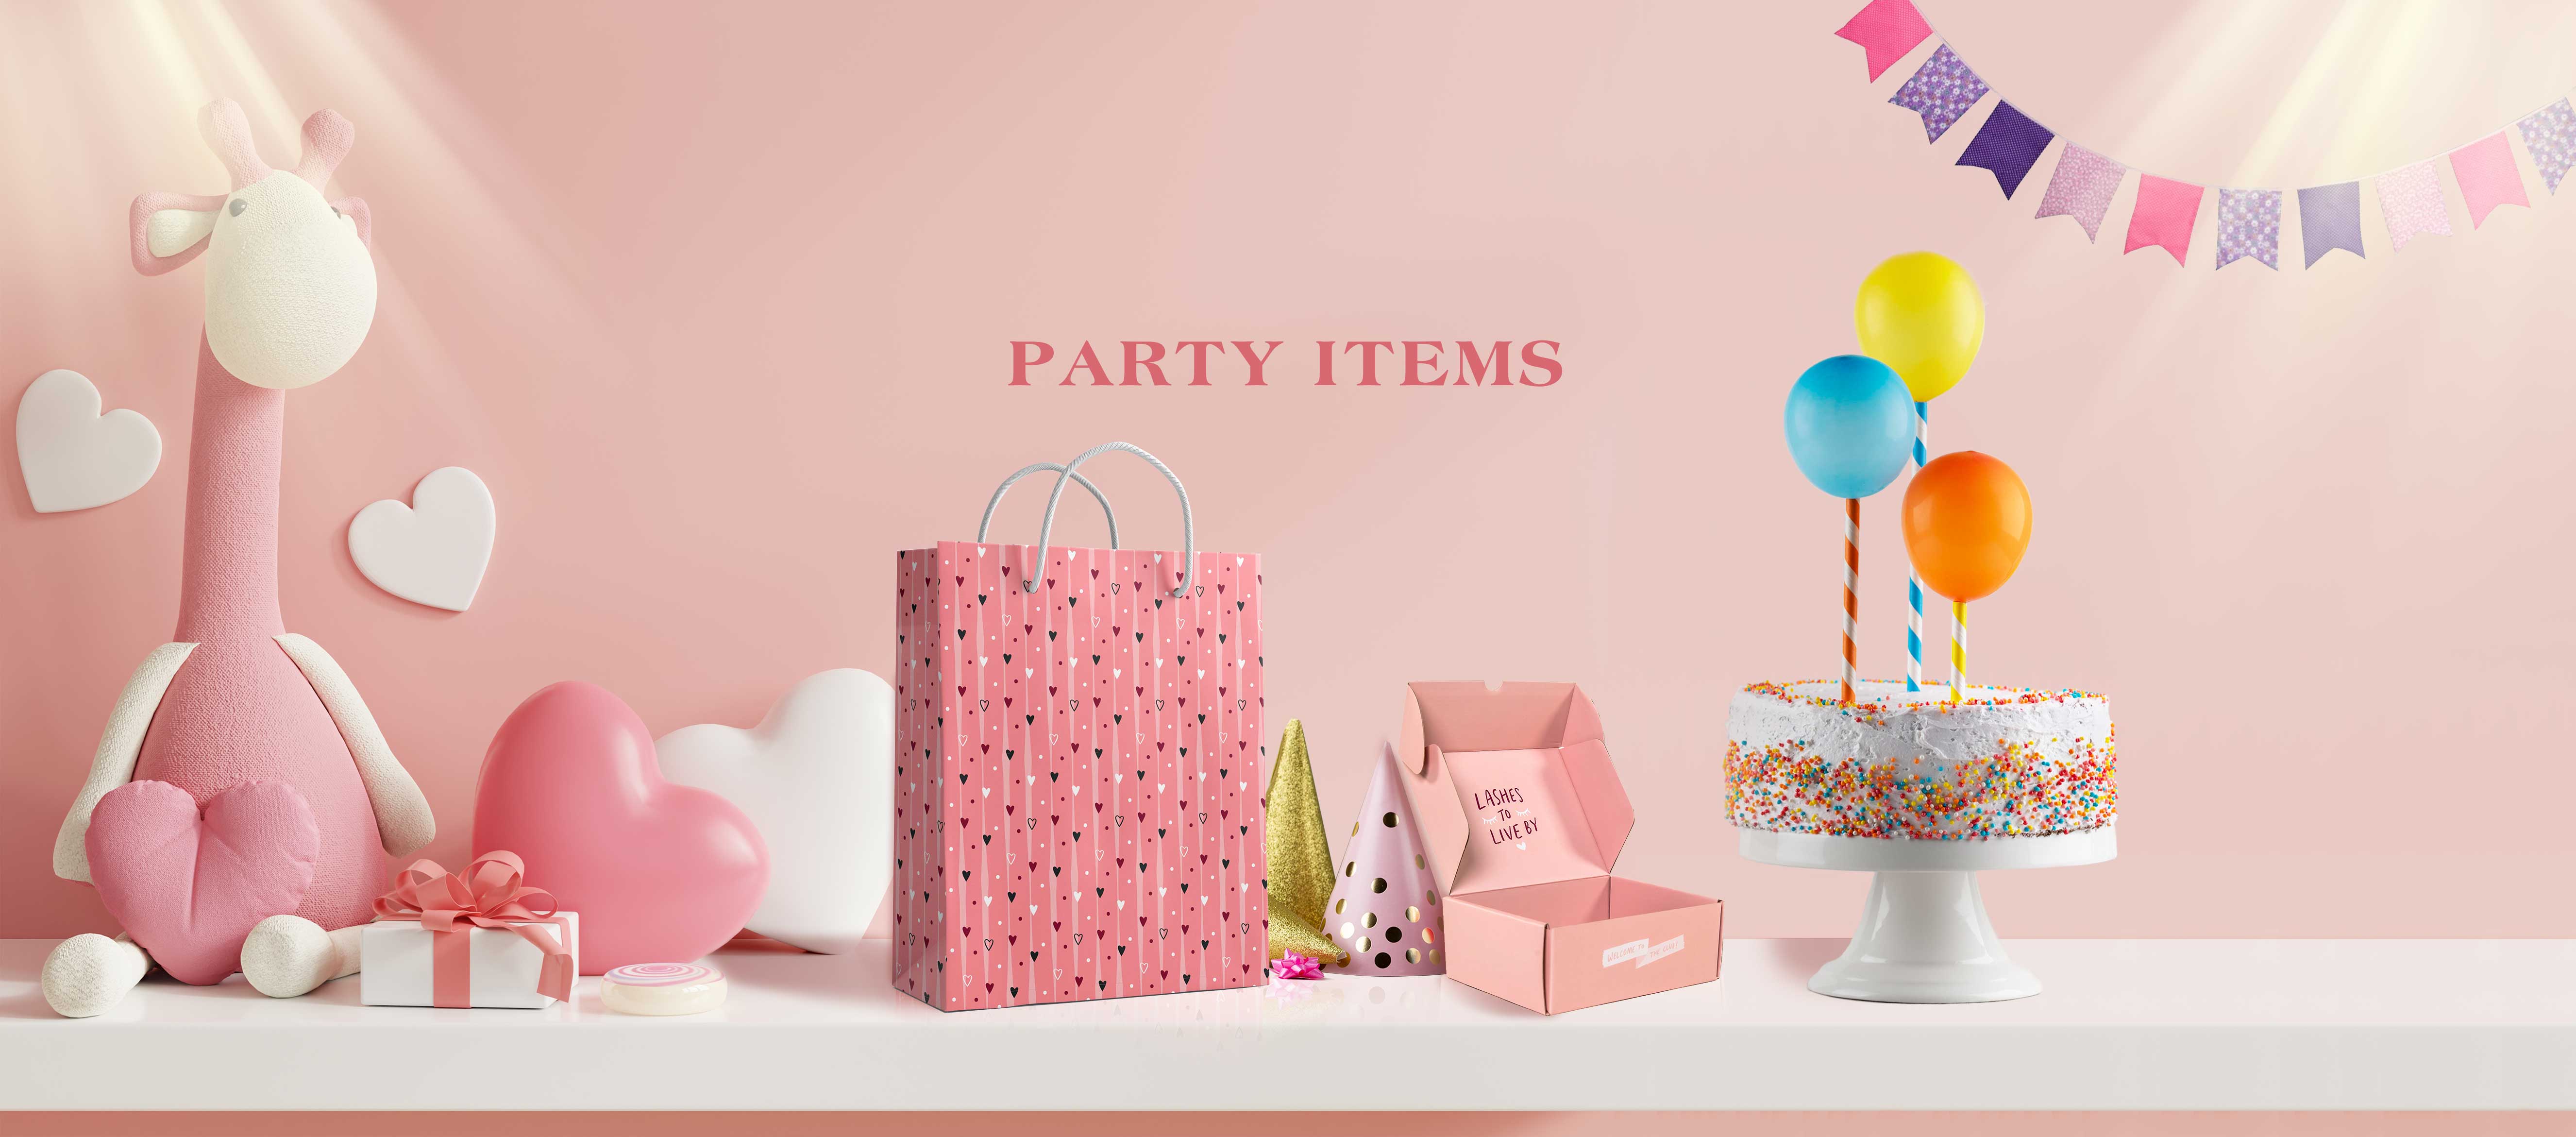 Party items Khang Thanh packaging company